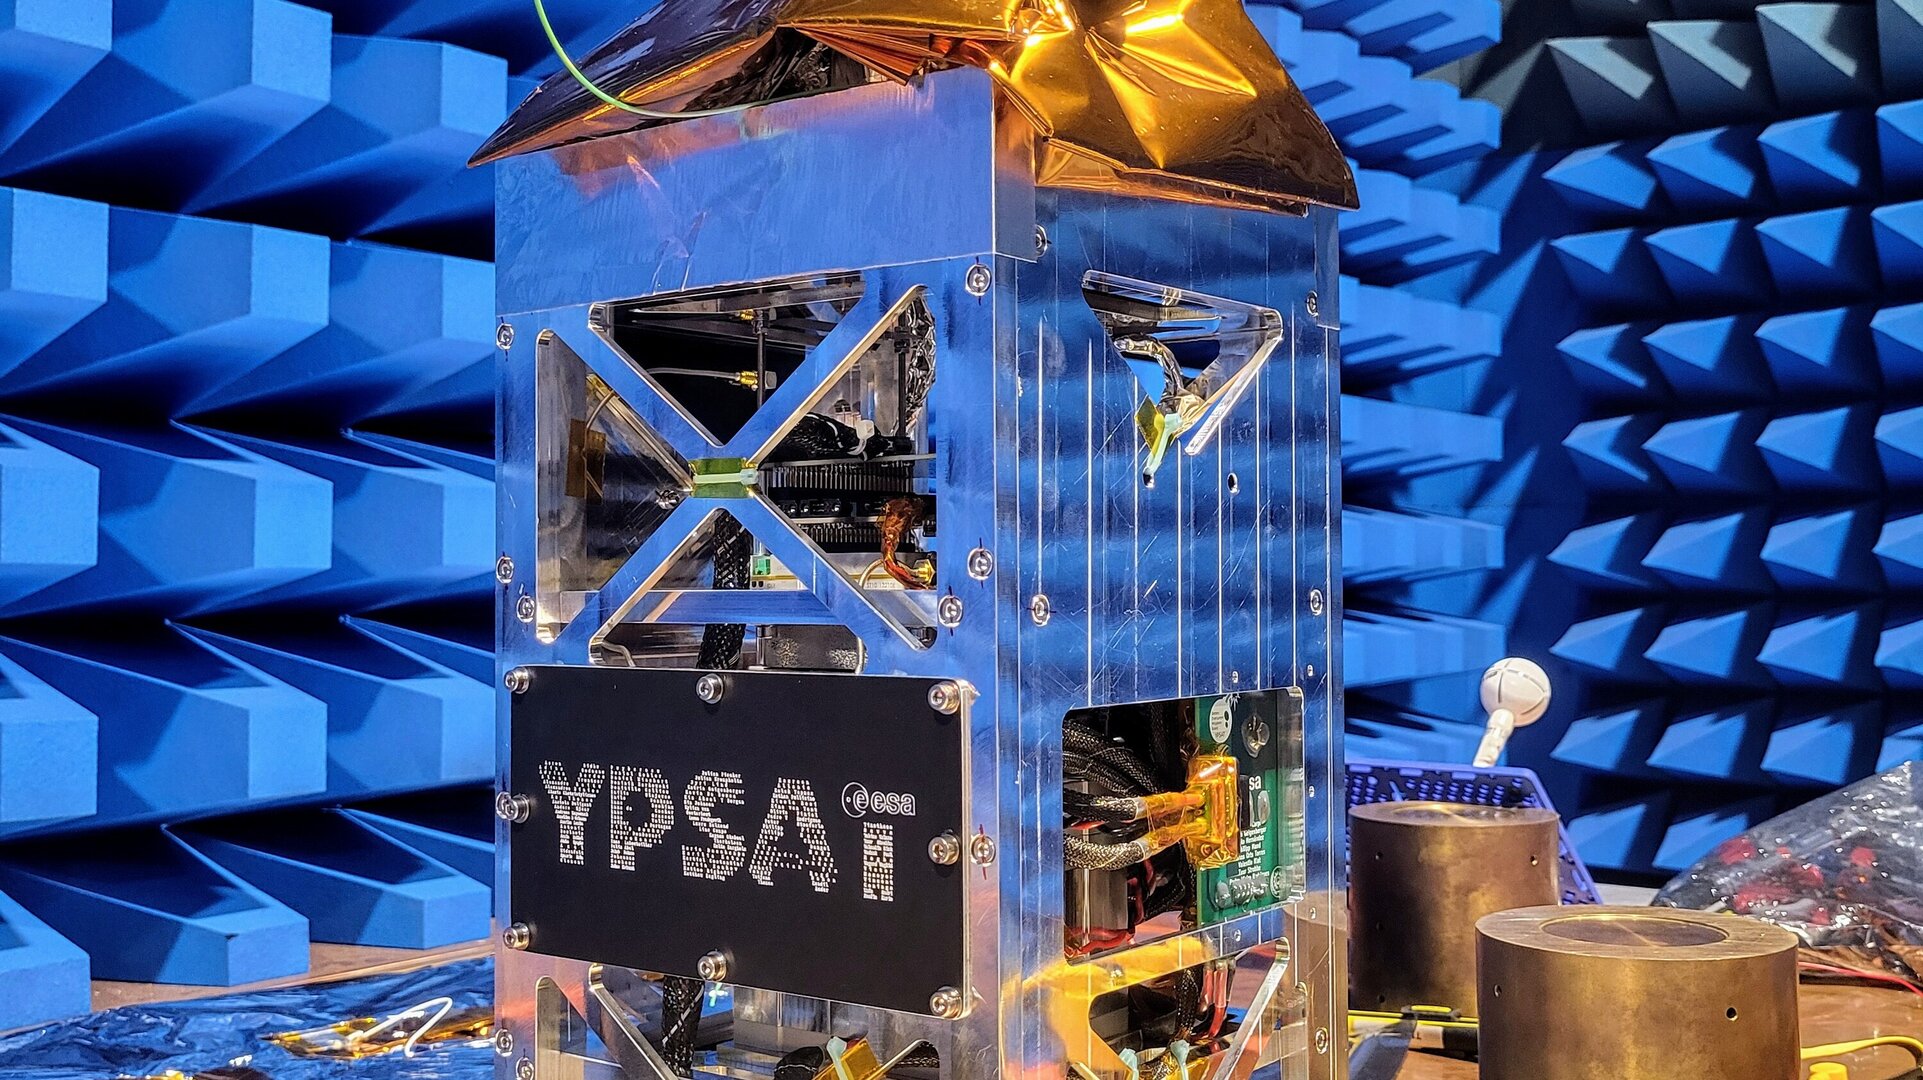 YPSat assembly during EMC testing, including OSCAR-QUBE+ and on the right GENESIS-A